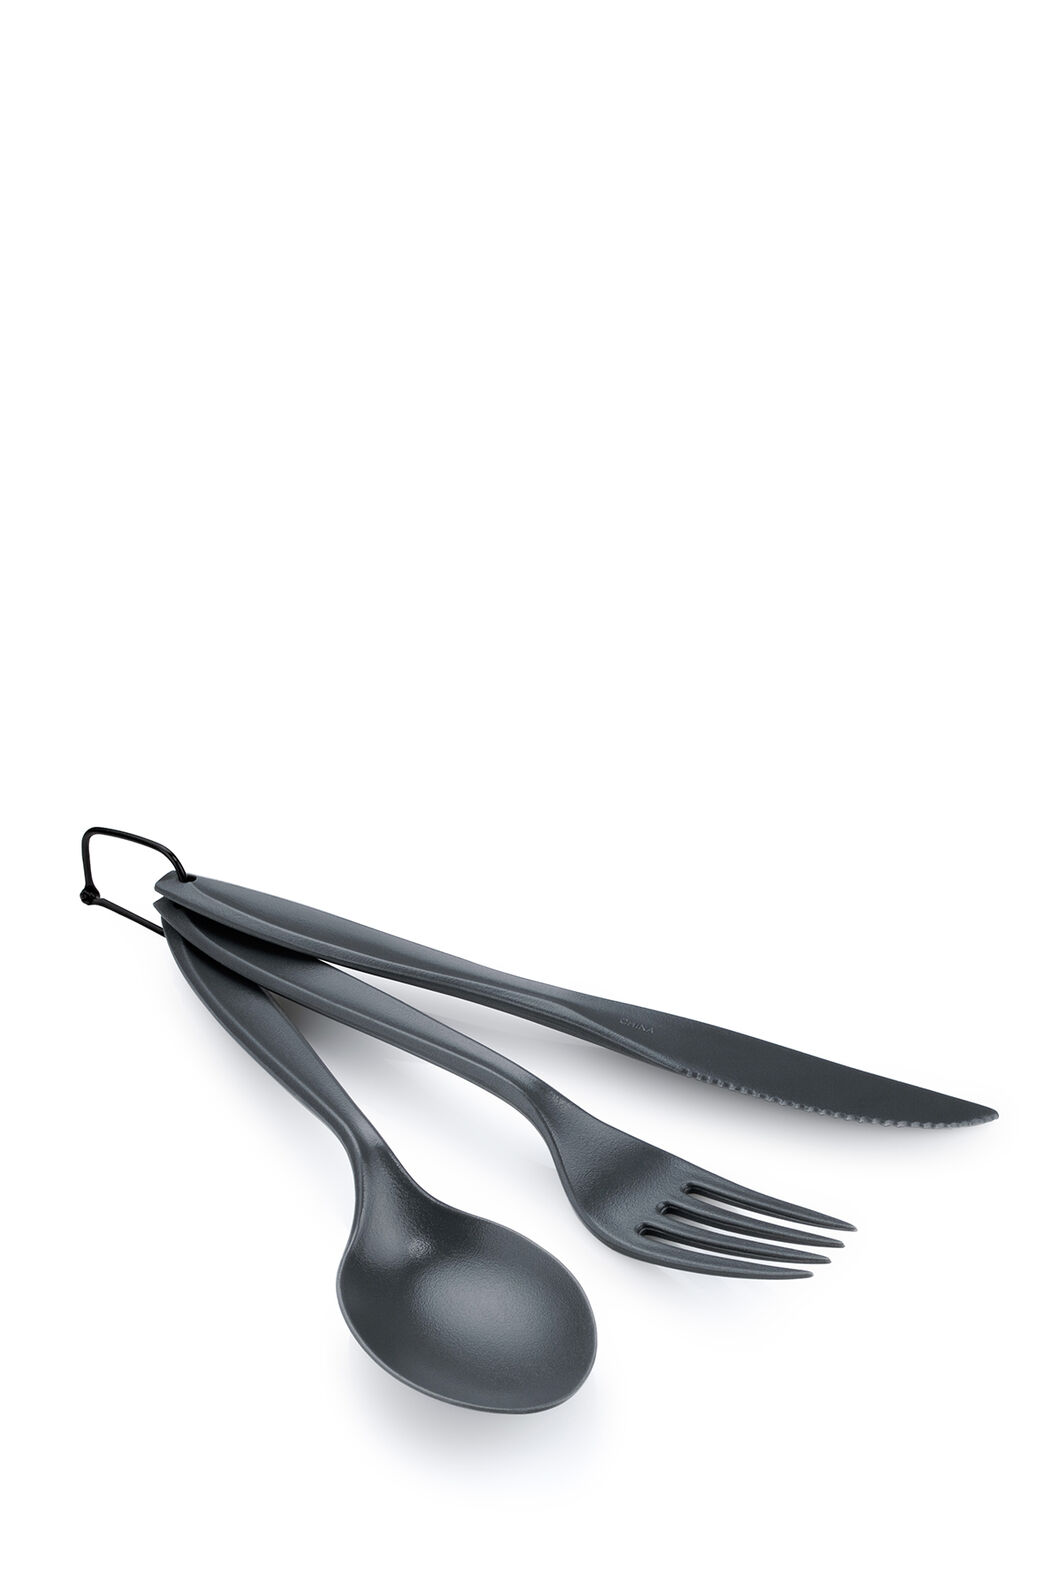 GSI 3 Piece Ring Cutlery Set, None, hi-res